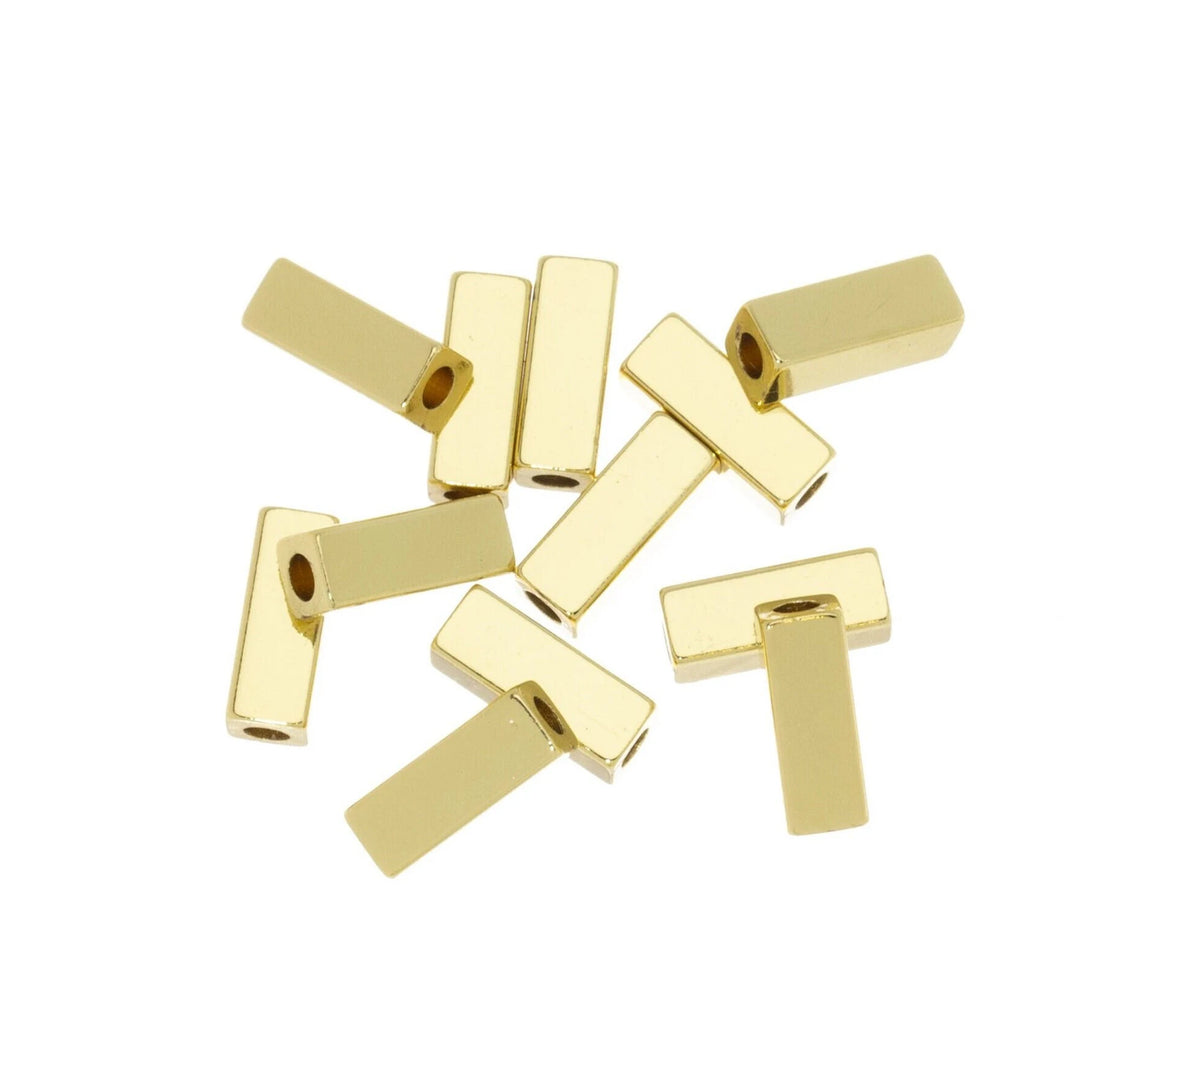 Rectangle Tube Spacer Bead,Tubular Gold Spacer Bead,Jewelry Spacer Bead For Elastic Cord Or Chain,SPG012